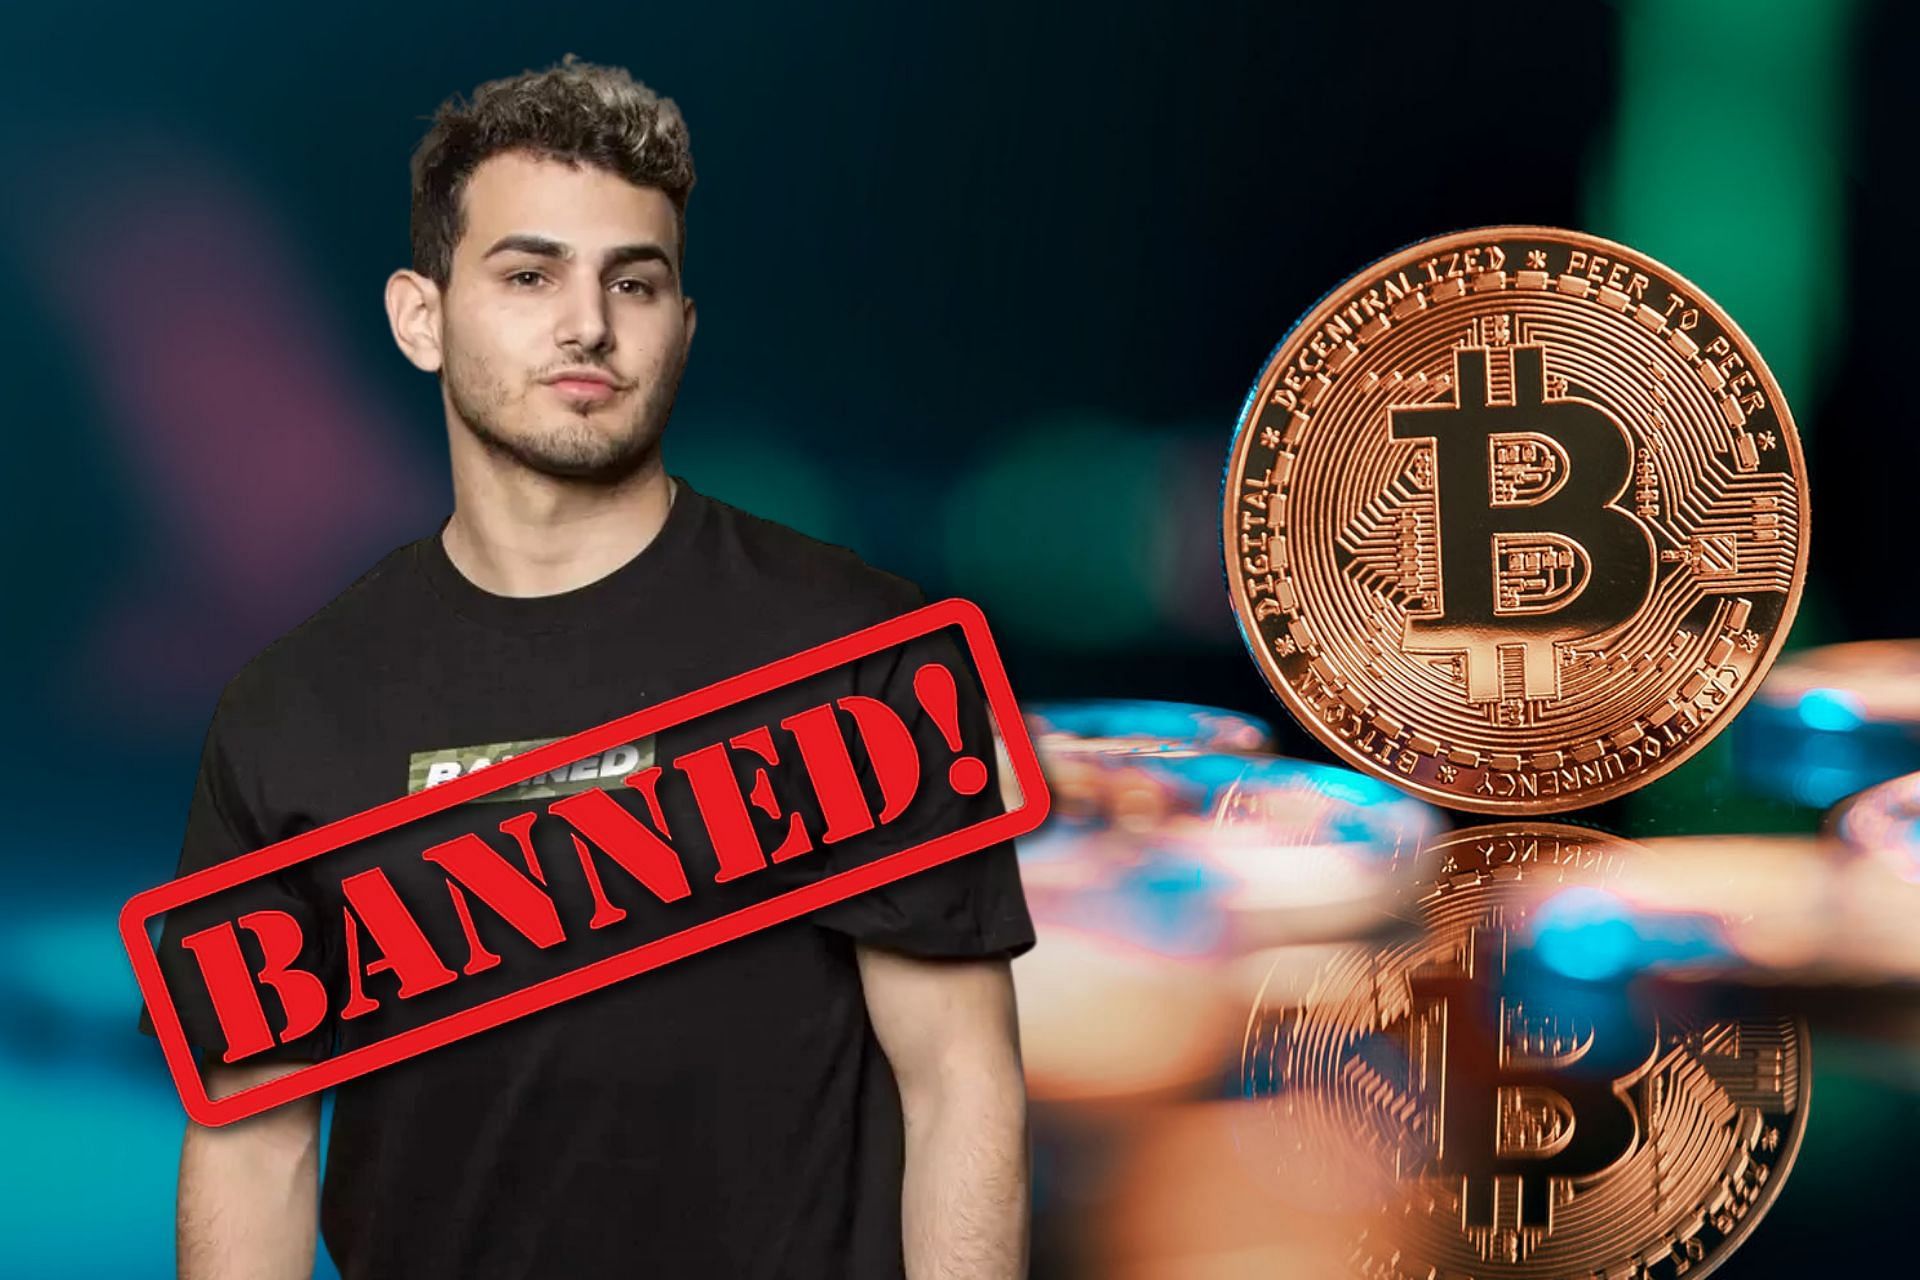 Fedmyster has been banned from Twitch after hackers used his account to run a Bitcoin scam (Image via Sportskeeda)